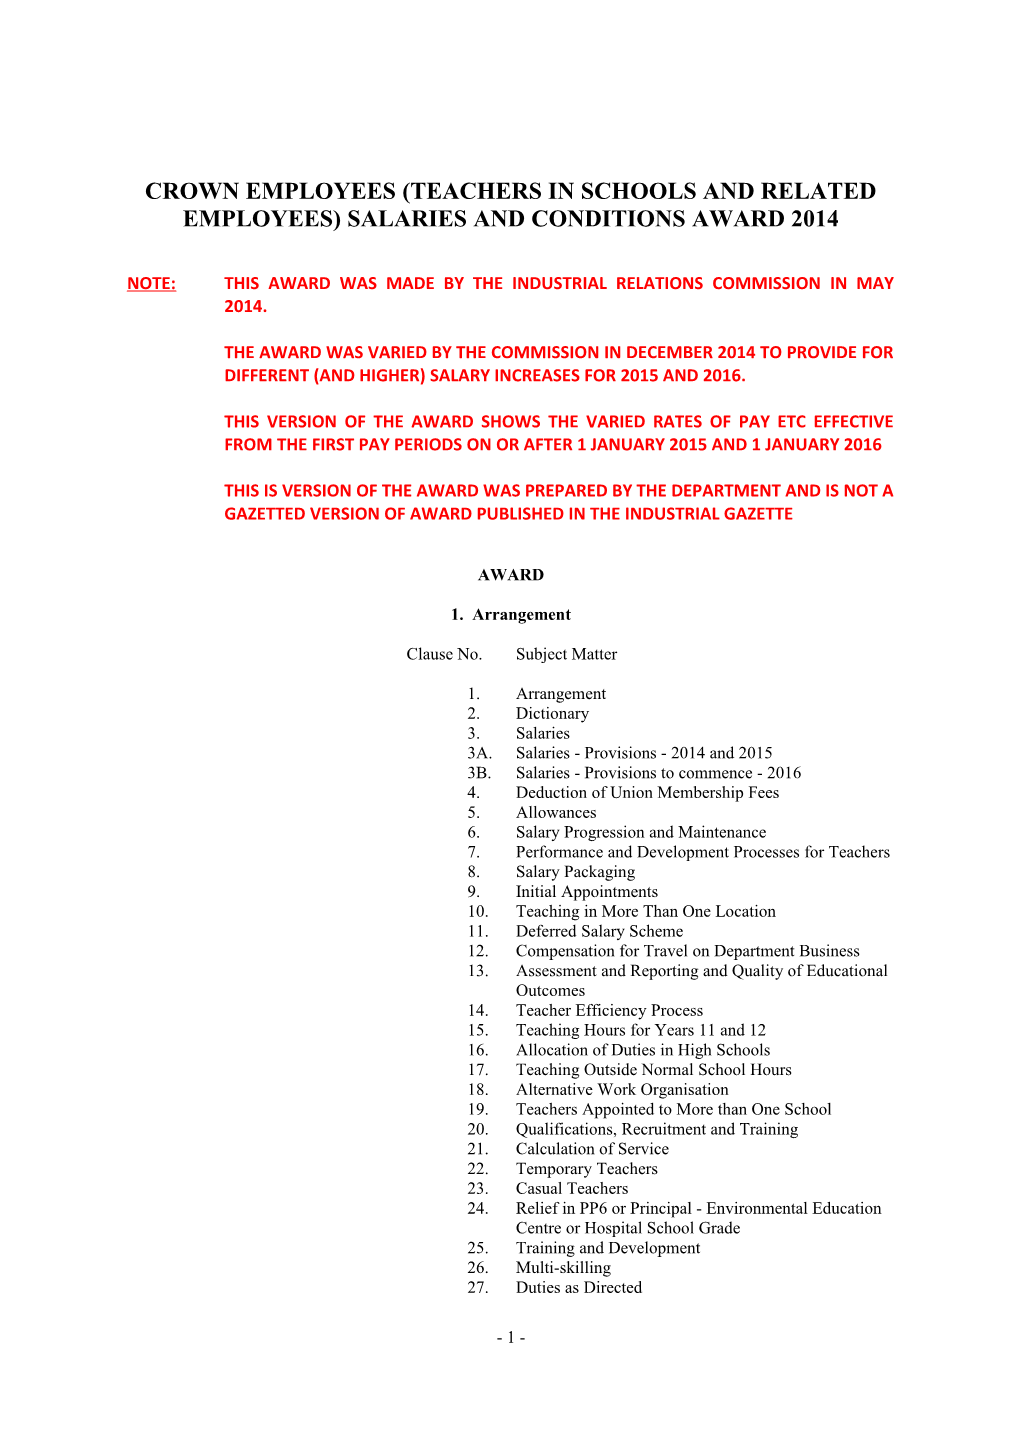 Crown Employees (Teachers in Schools and Related Employees) Salaries and Conditions Award 2014